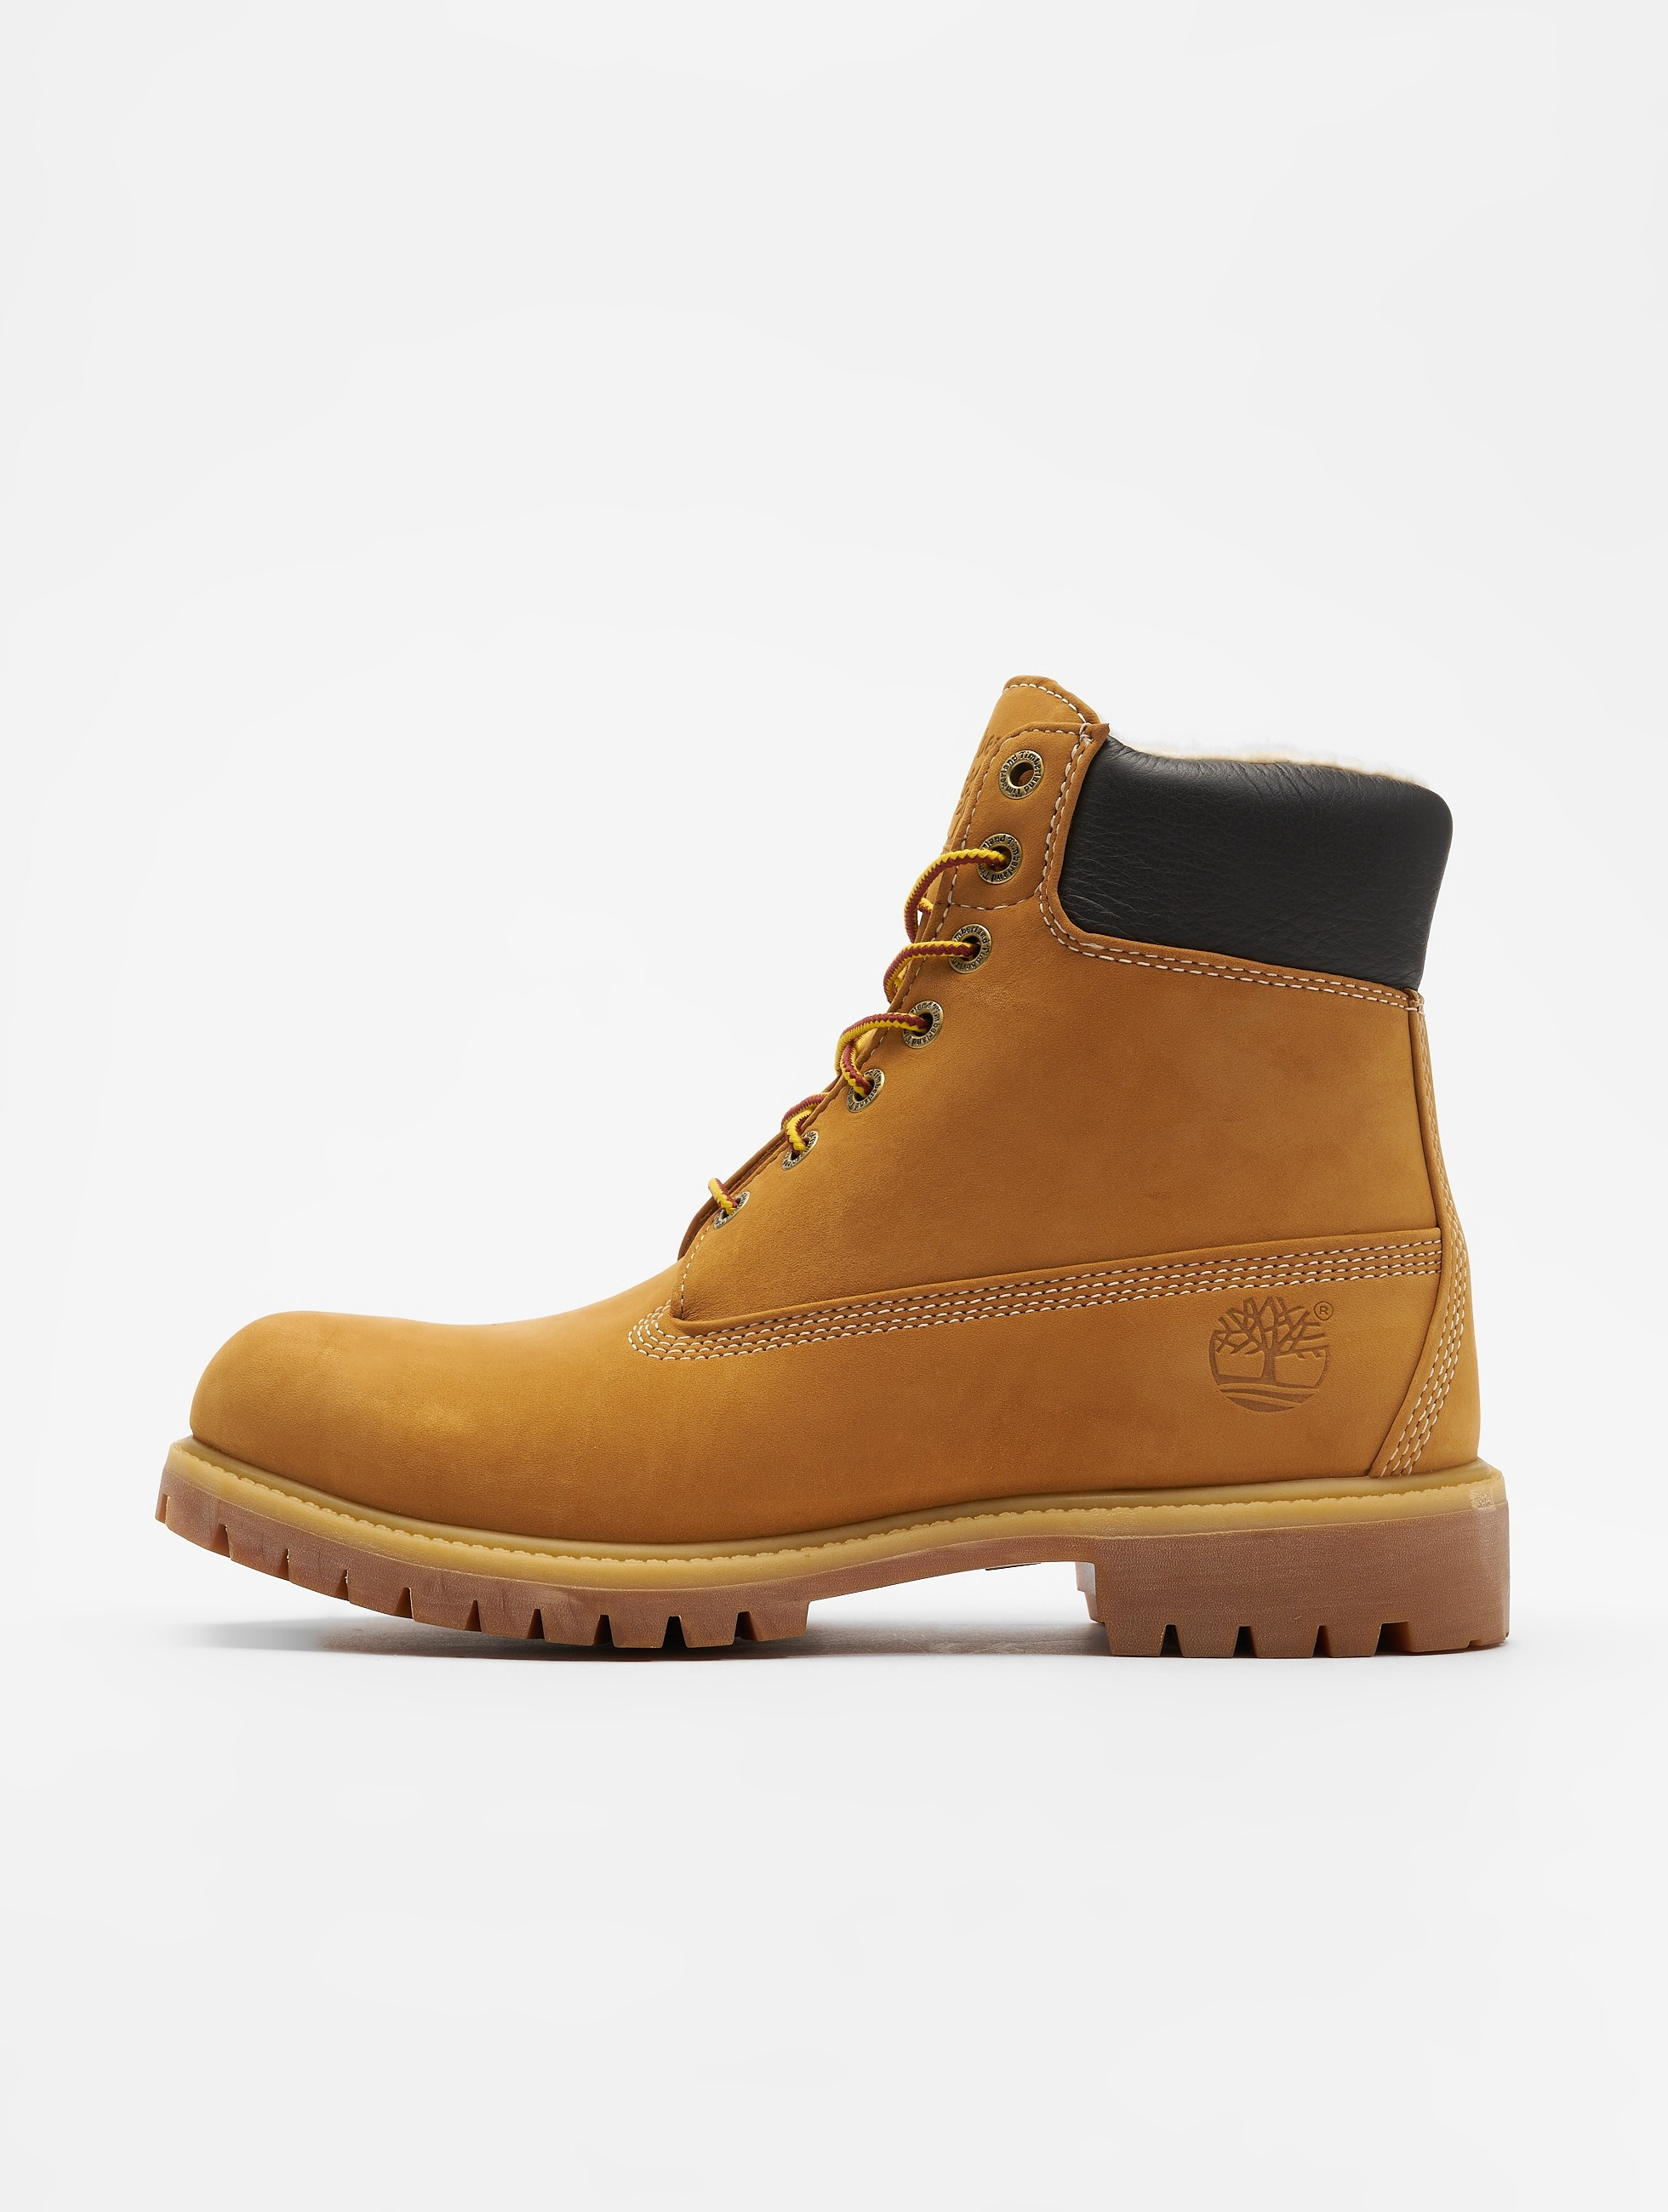 where to buy timberland work boots